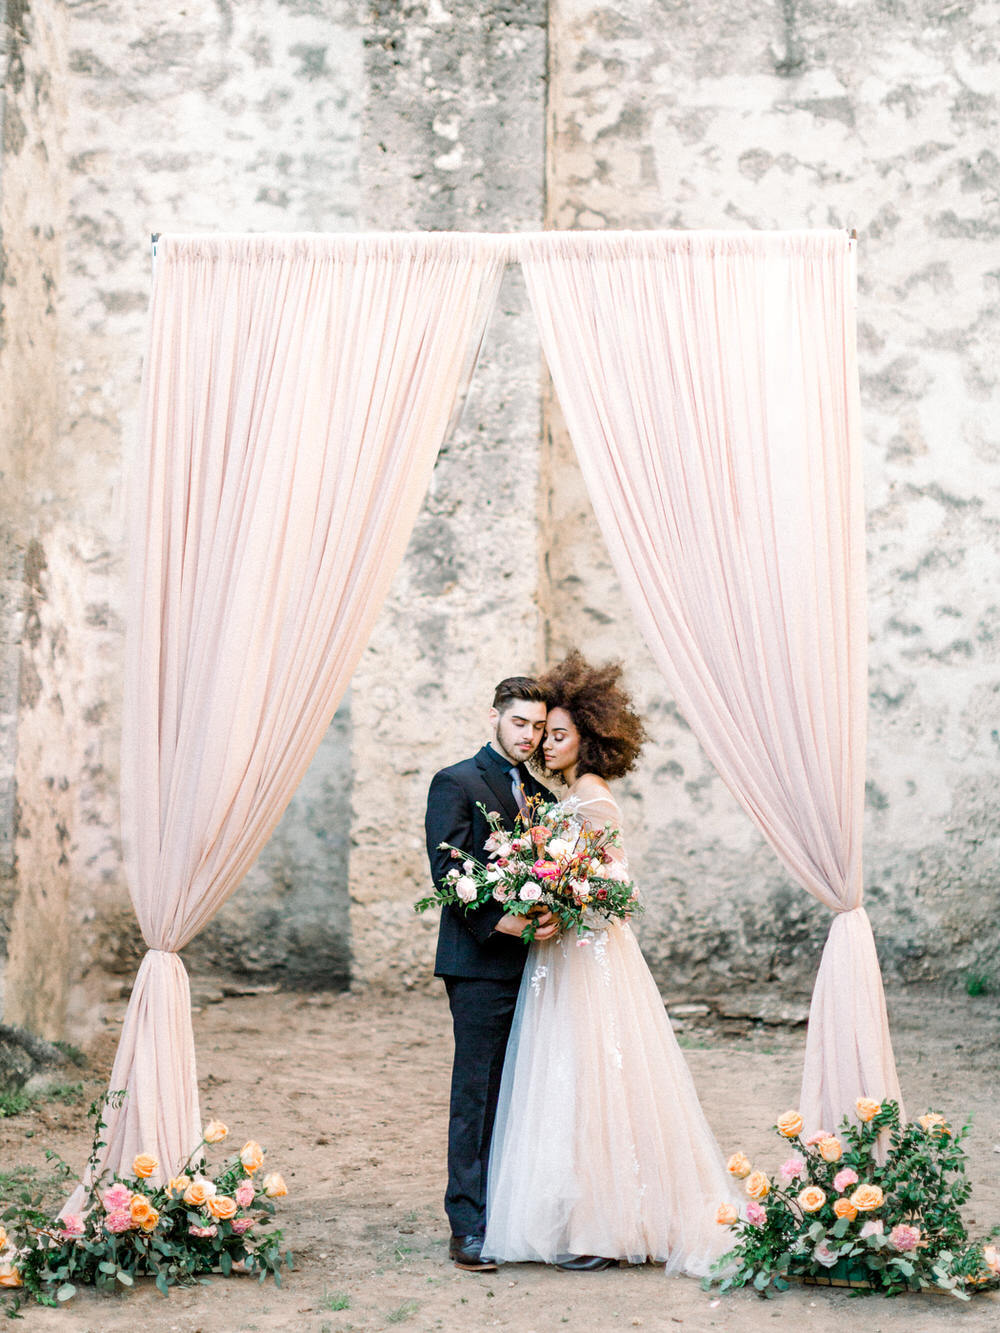 soft blush pink draping at wedding ceremony with bride and groom